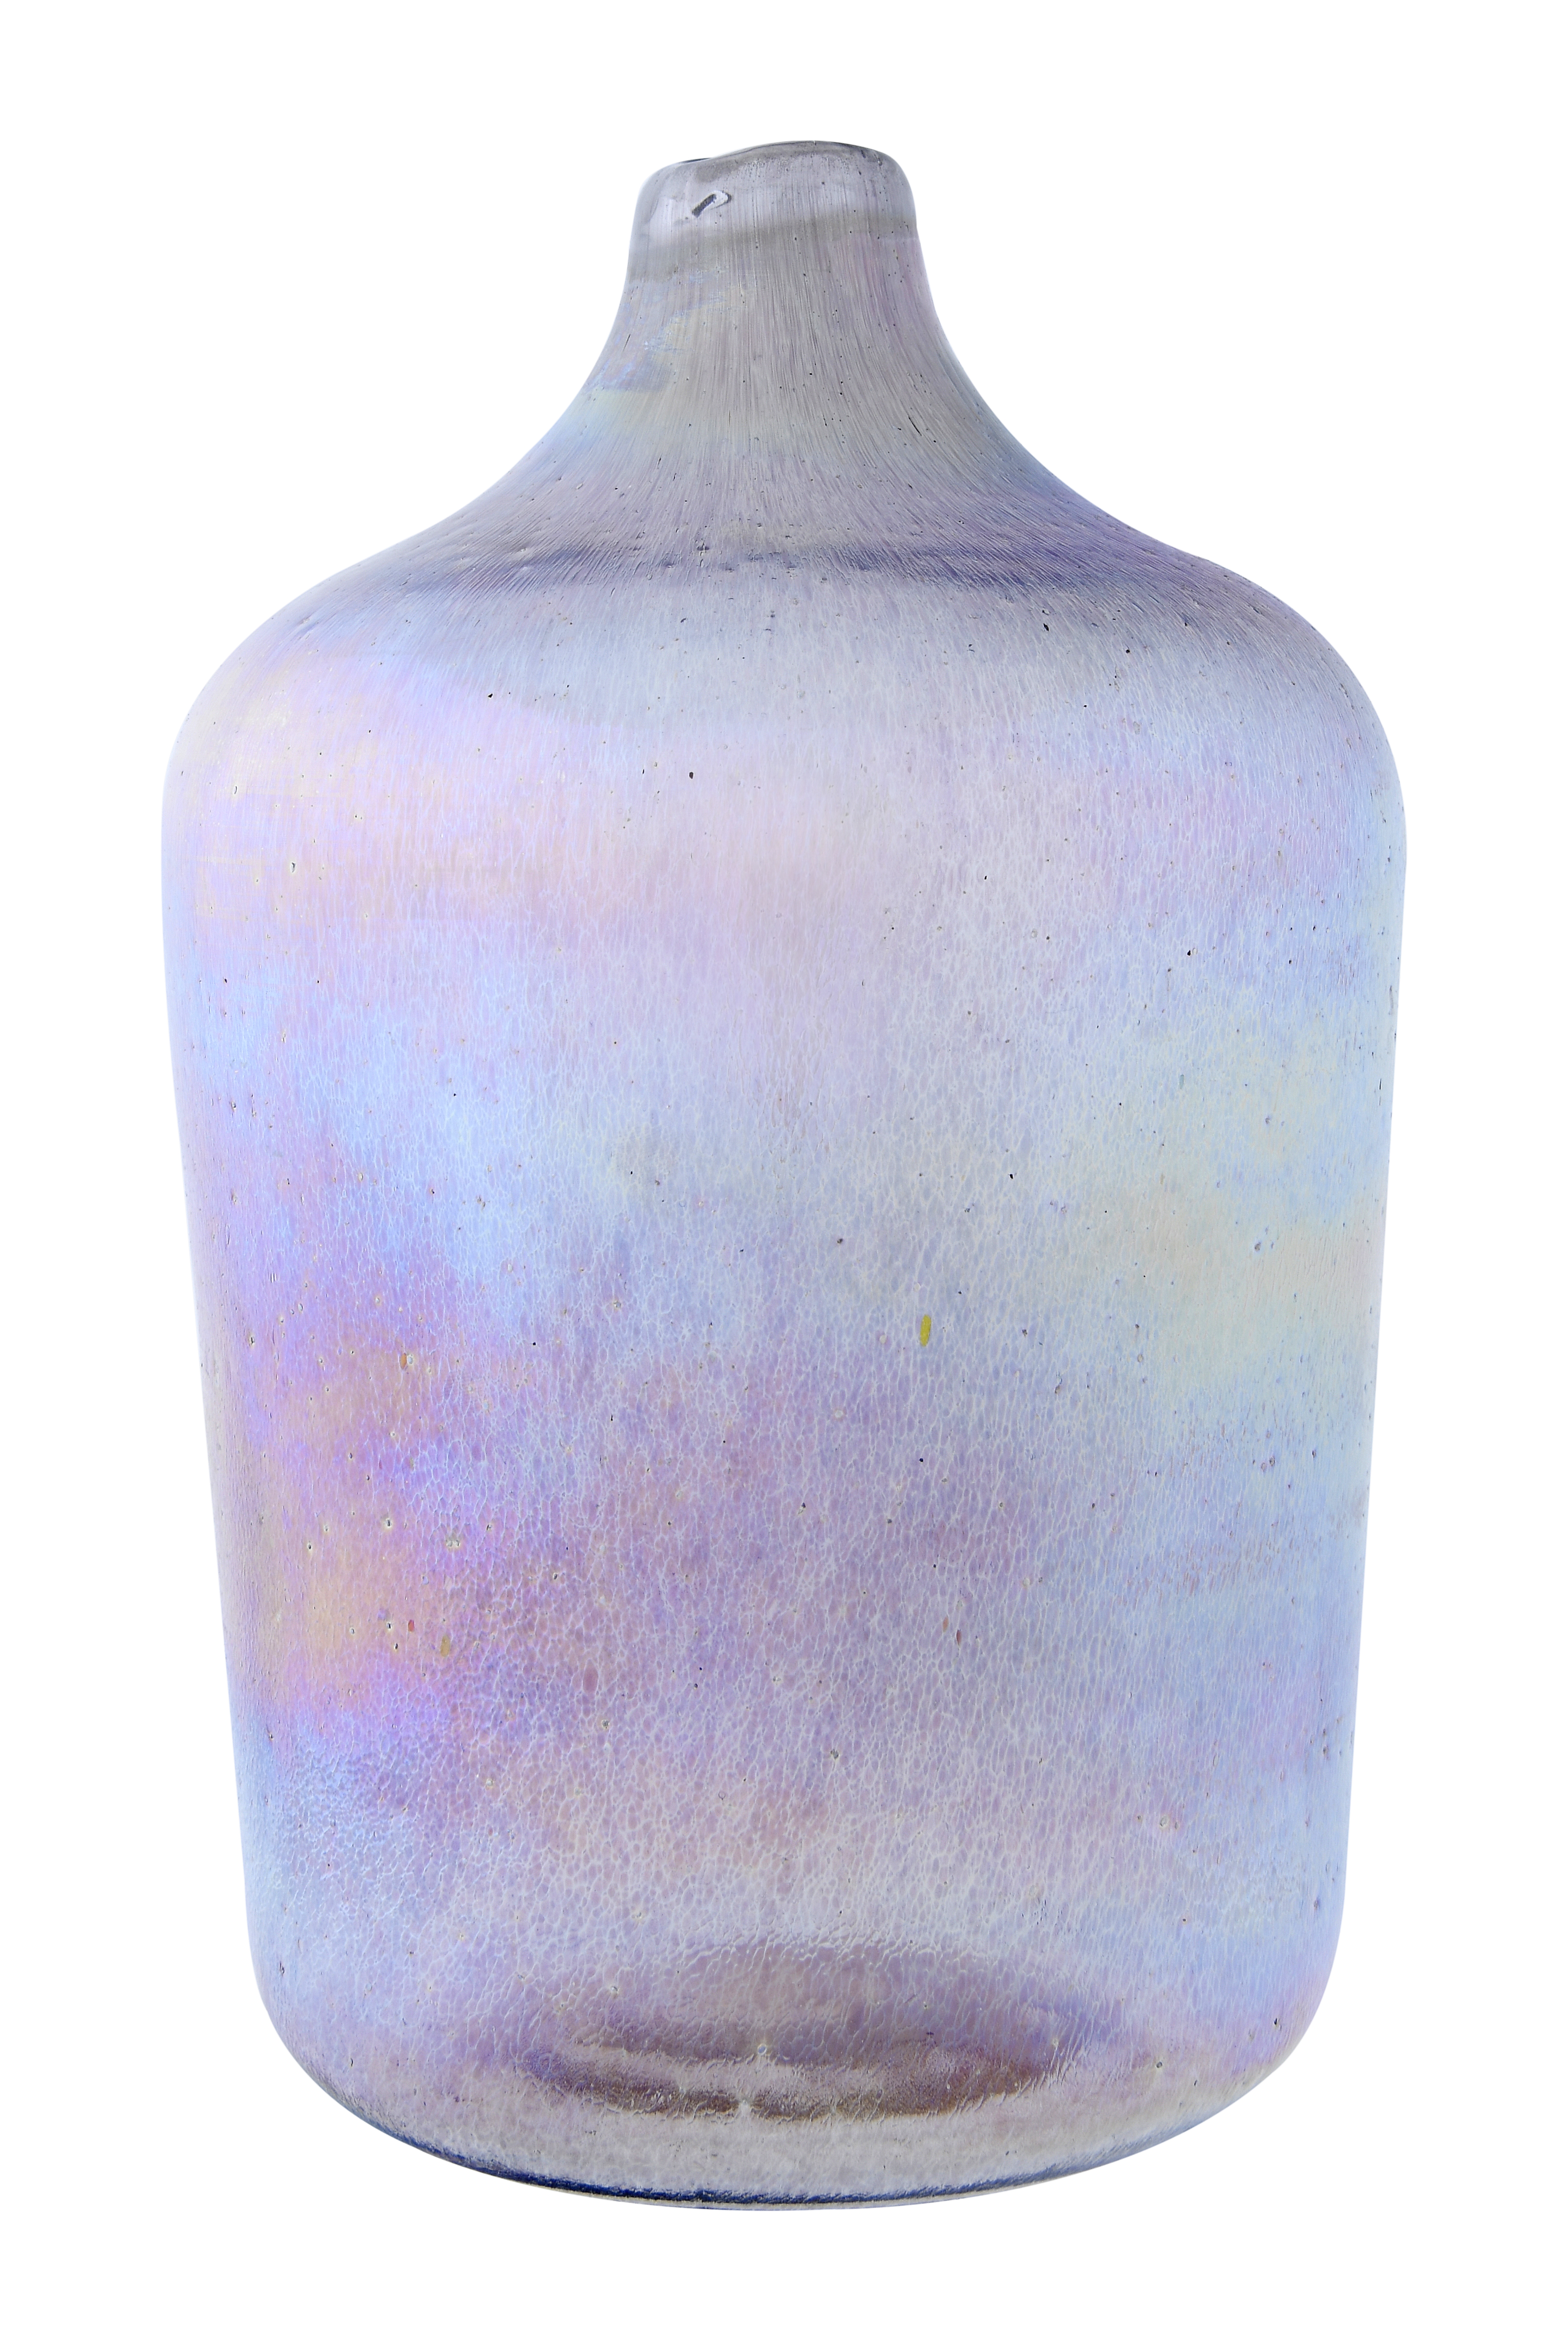 Glass Vase with Distressed Iridescent Finish - Image 0